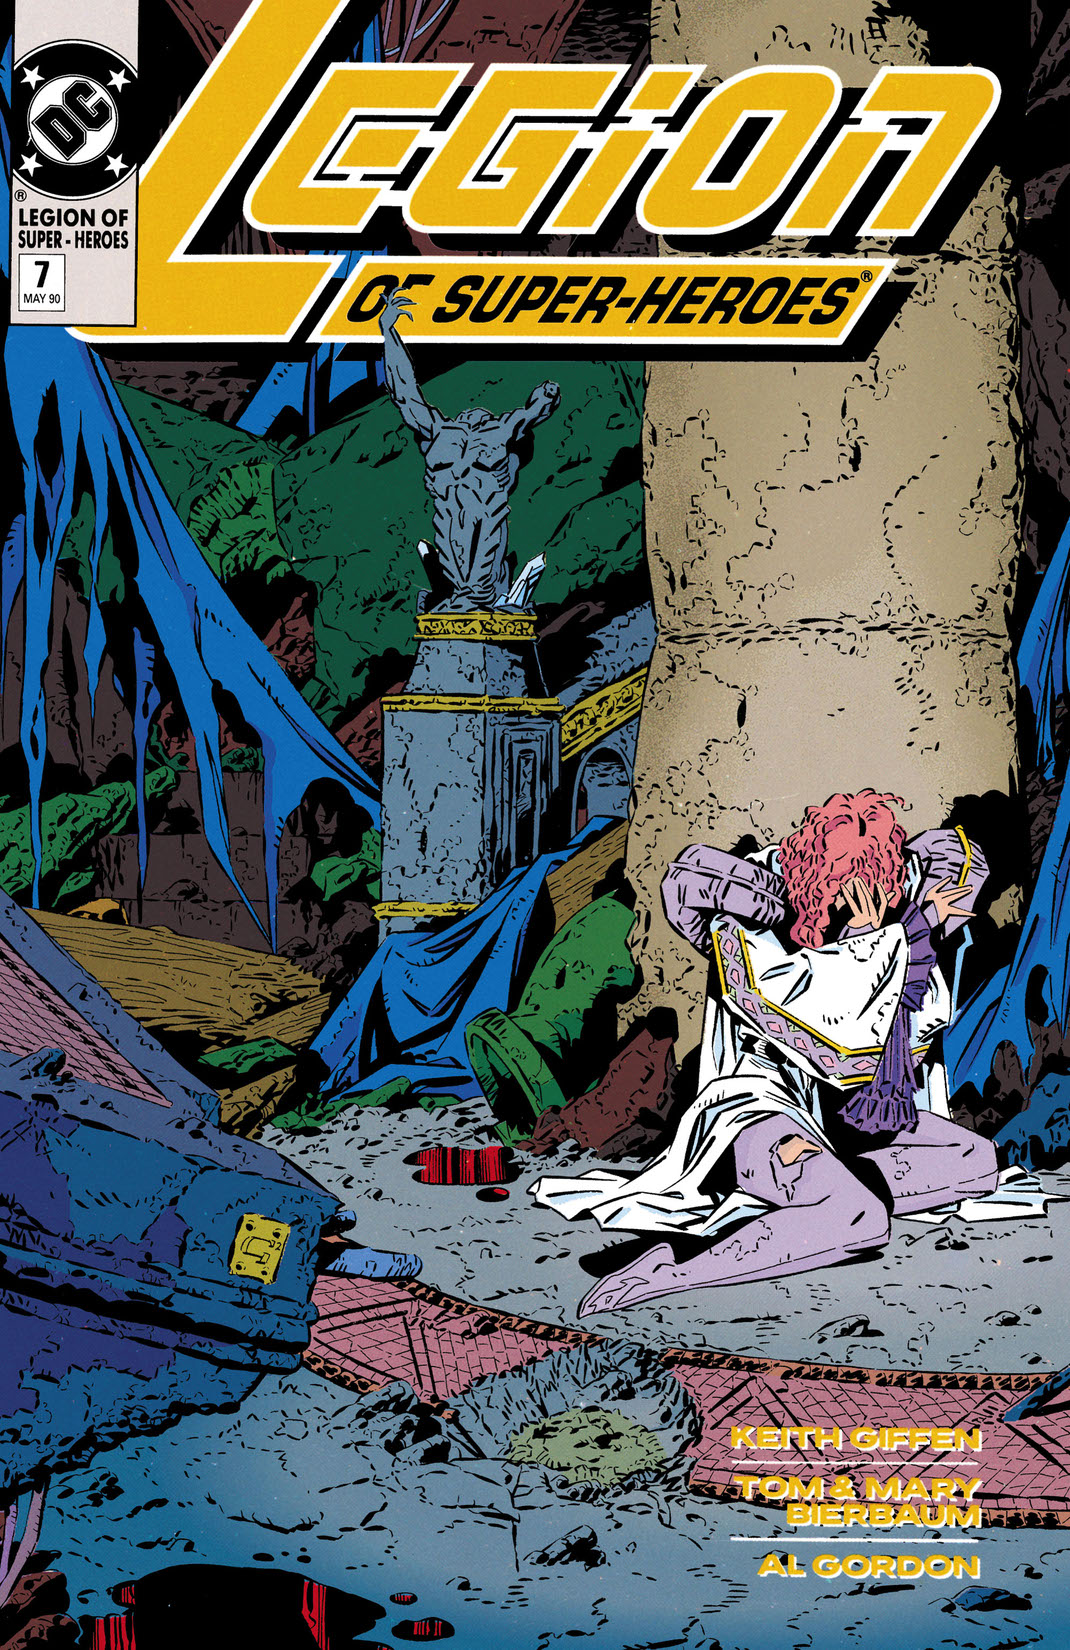 Legion of Super-Heroes (1989-) #7 preview images